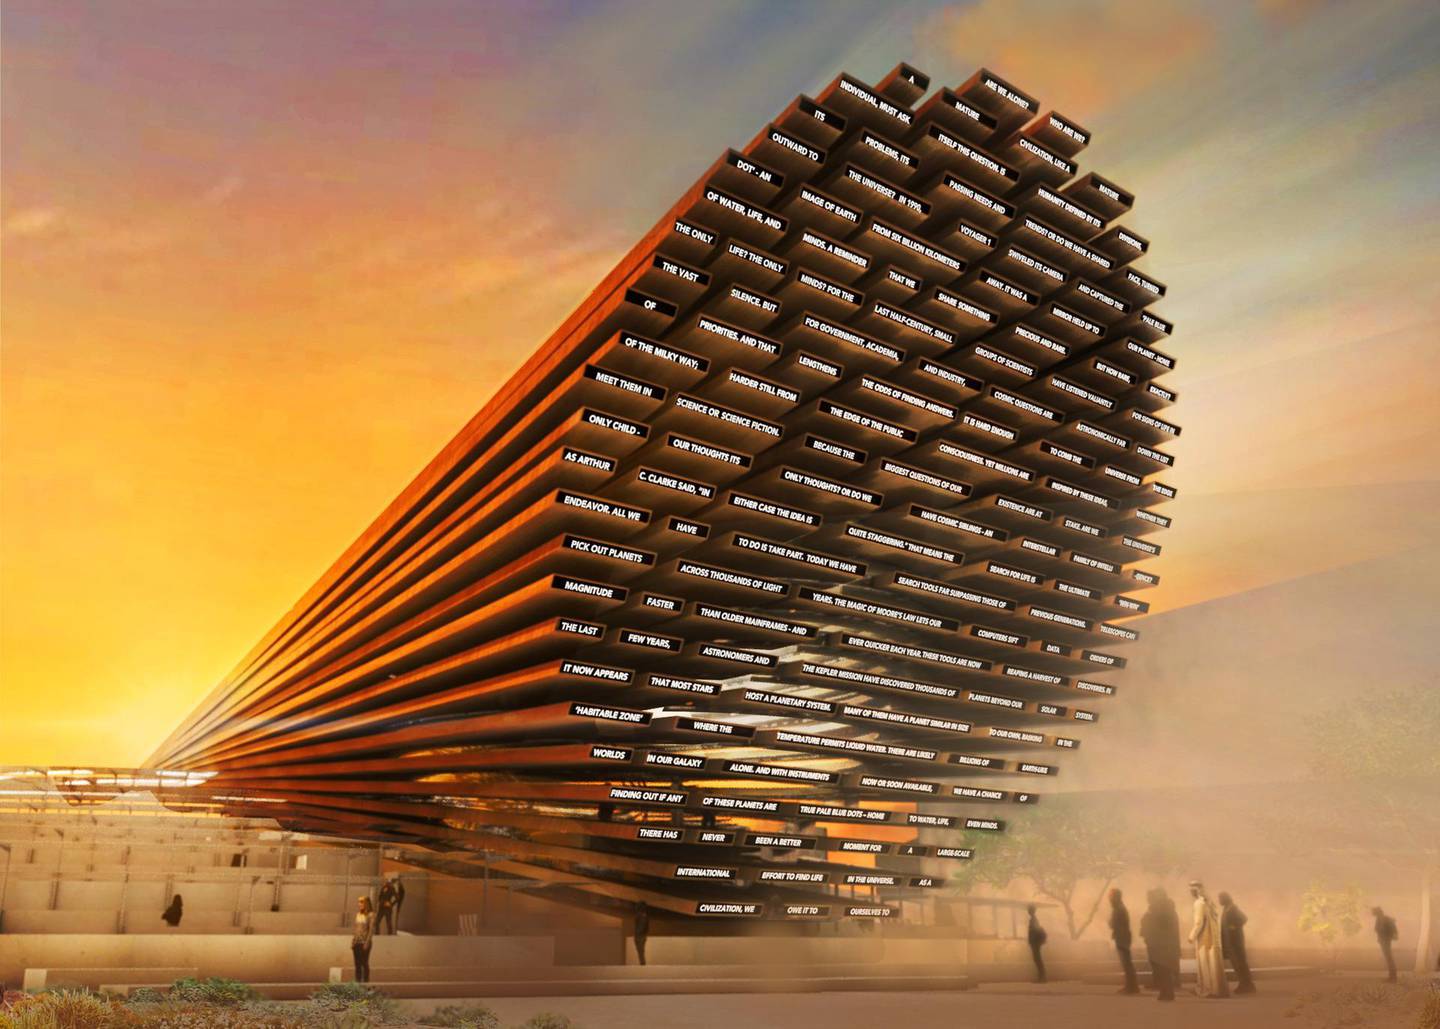 A rendering of the UK pavilion at Expo 2020 Dubai. Courtesy of the UK’s Department for International Trade © Es Devlin